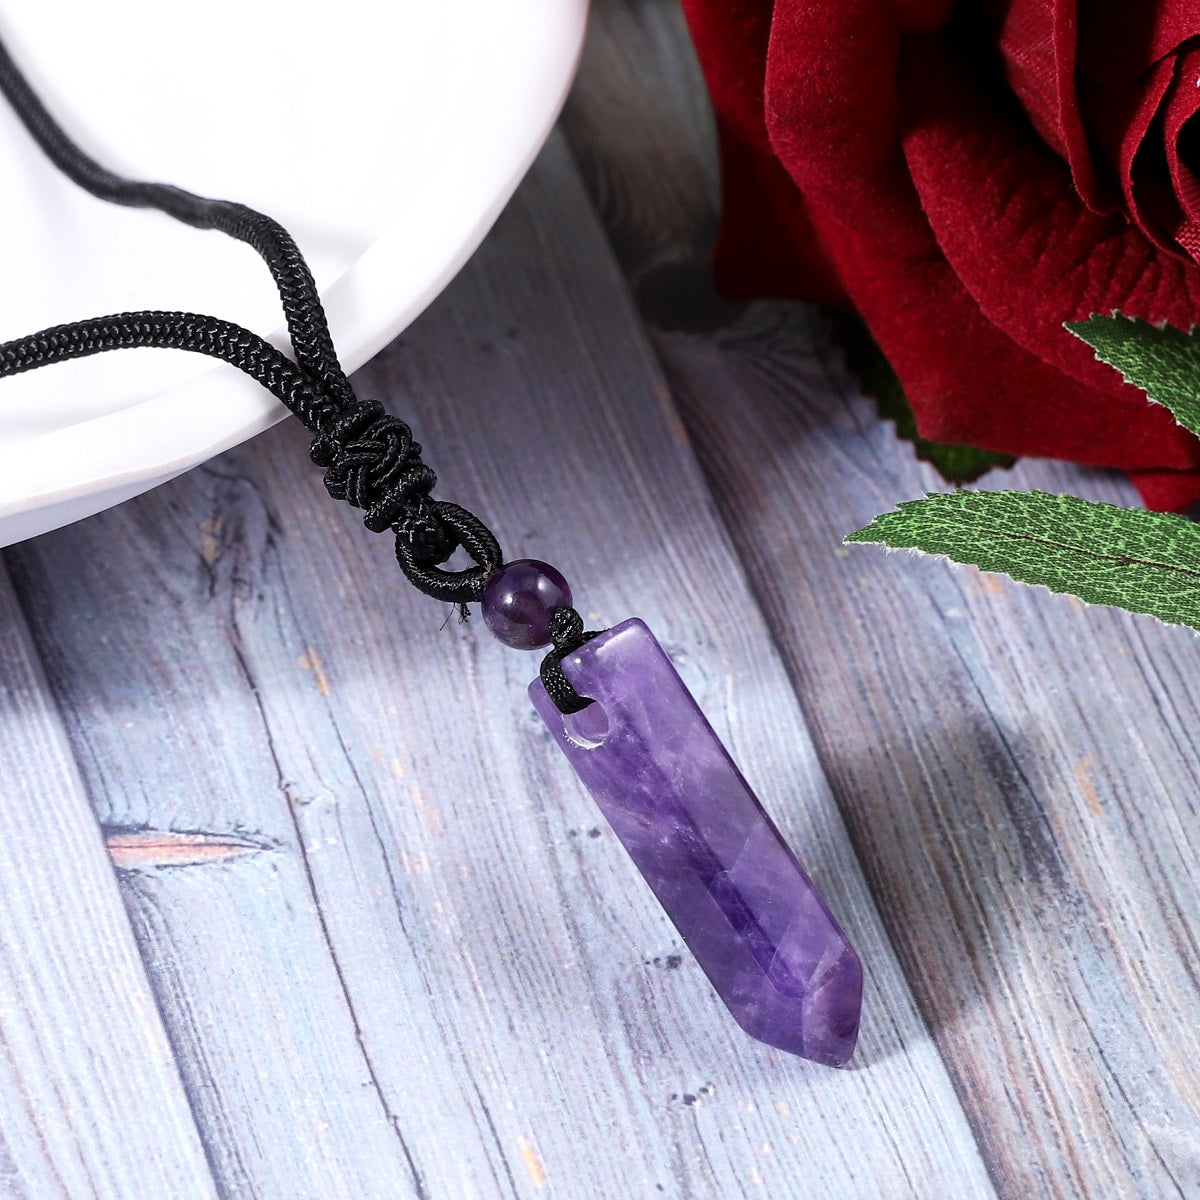 A detailed view of the artistic and intricate wrapping design that surrounds the Amethyst gemstone, adding a touch of elegance to the pendant necklace.